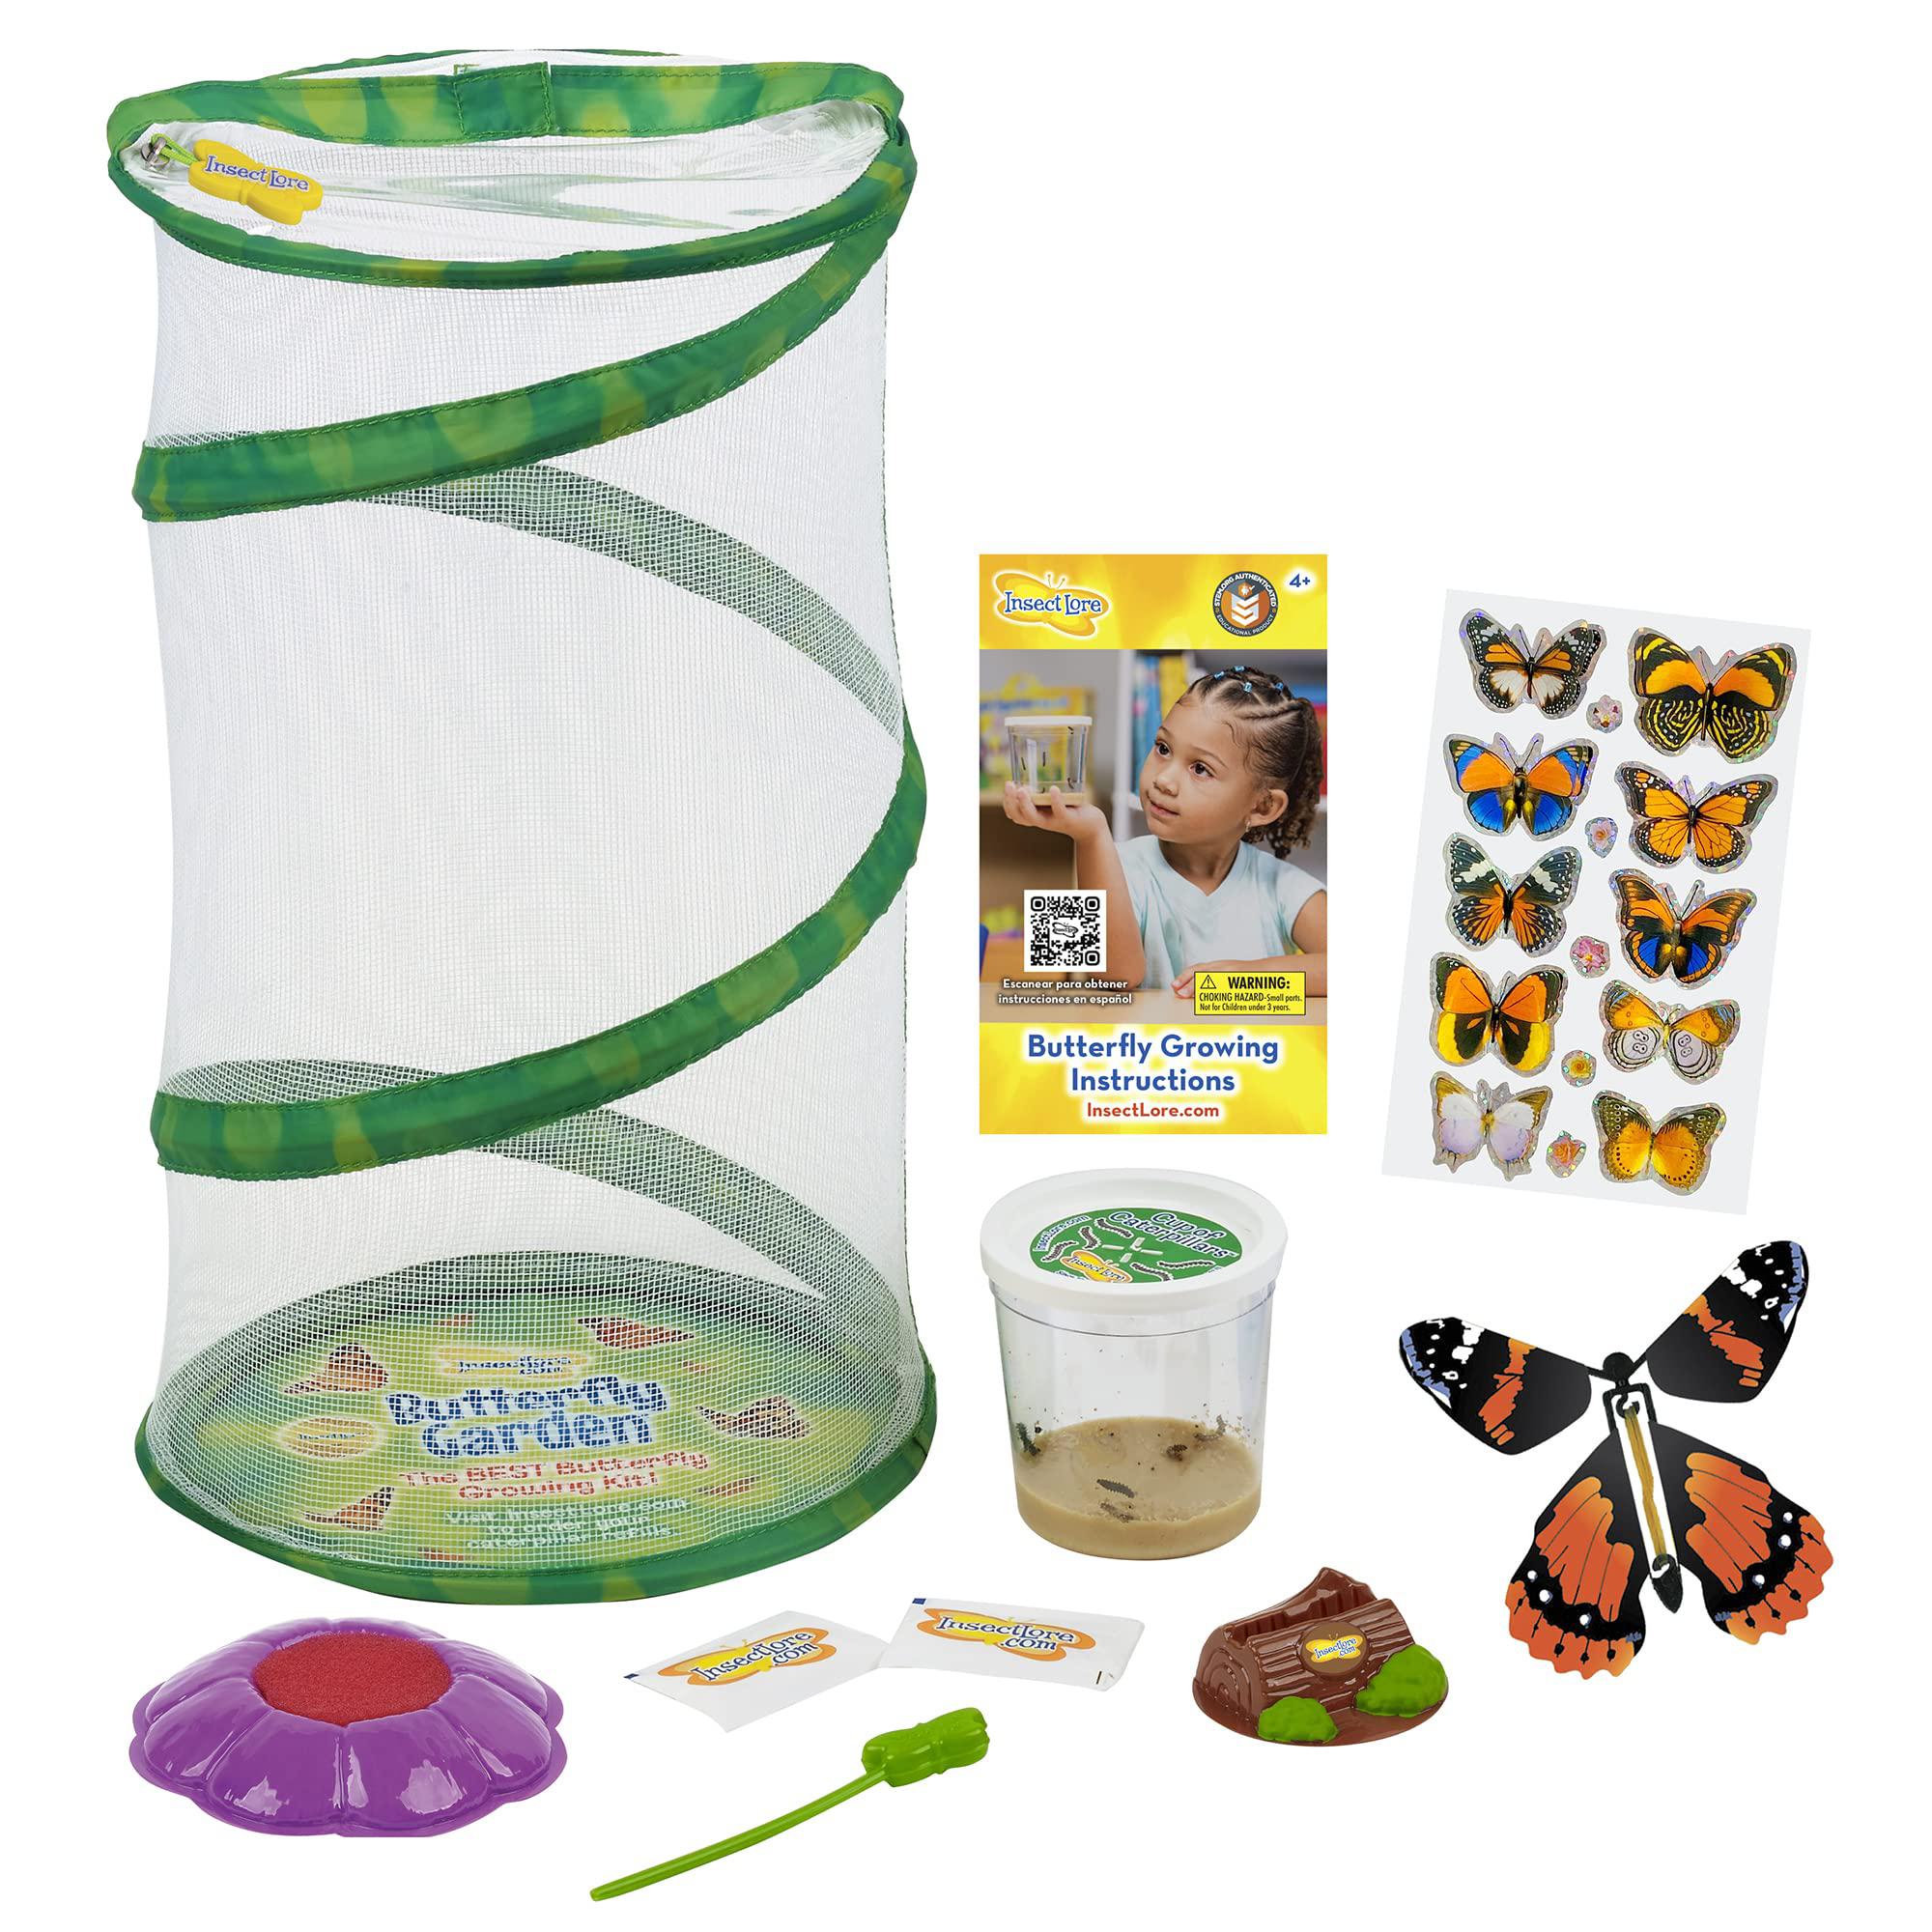 Insect Lore butterfly mini garden gift set with live cup of caterpillars - life science & stem education - best birthday gift, for boys &